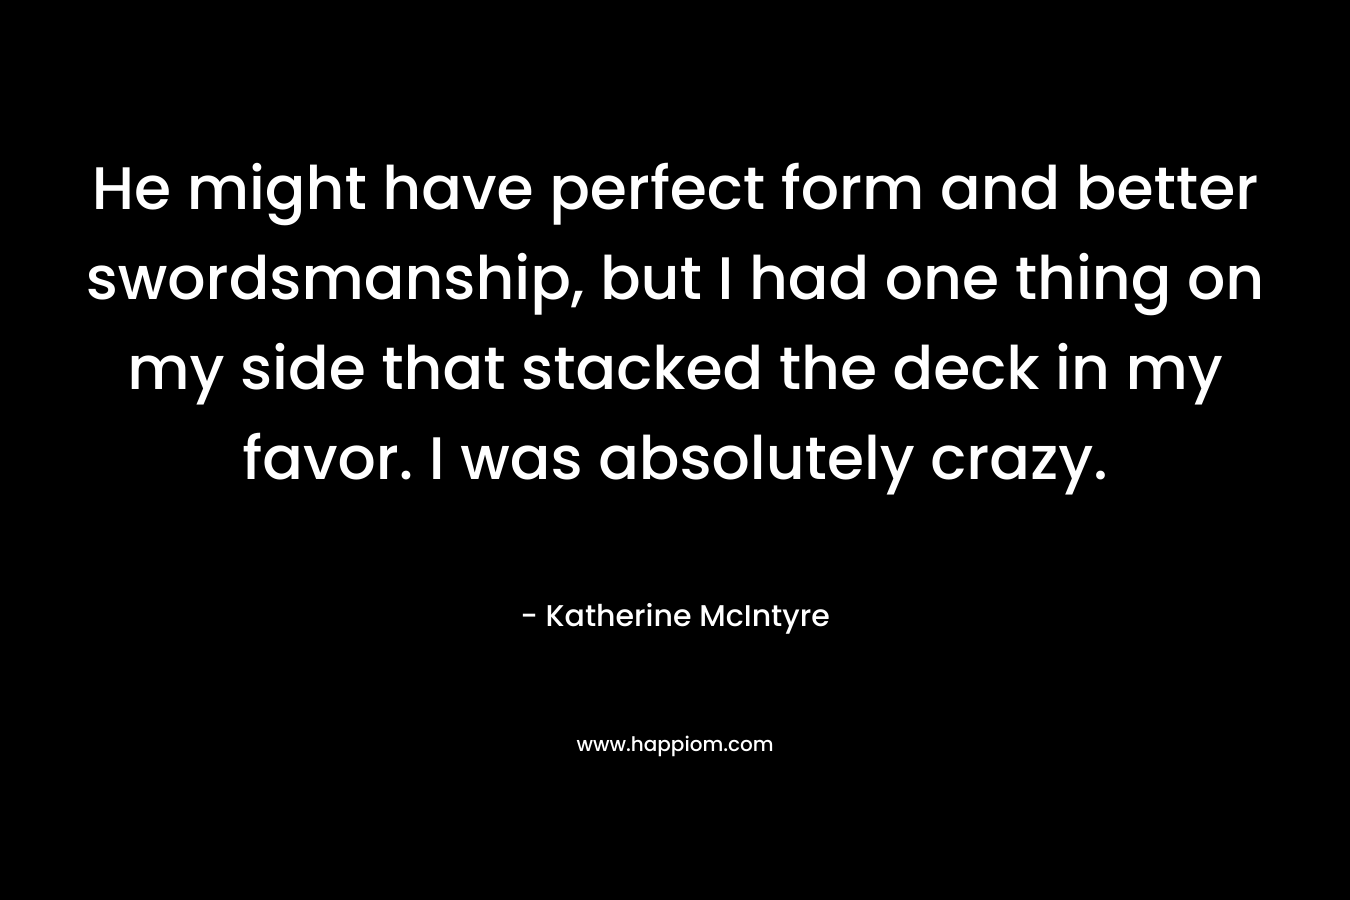 He might have perfect form and better swordsmanship, but I had one thing on my side that stacked the deck in my favor. I was absolutely crazy. – Katherine McIntyre